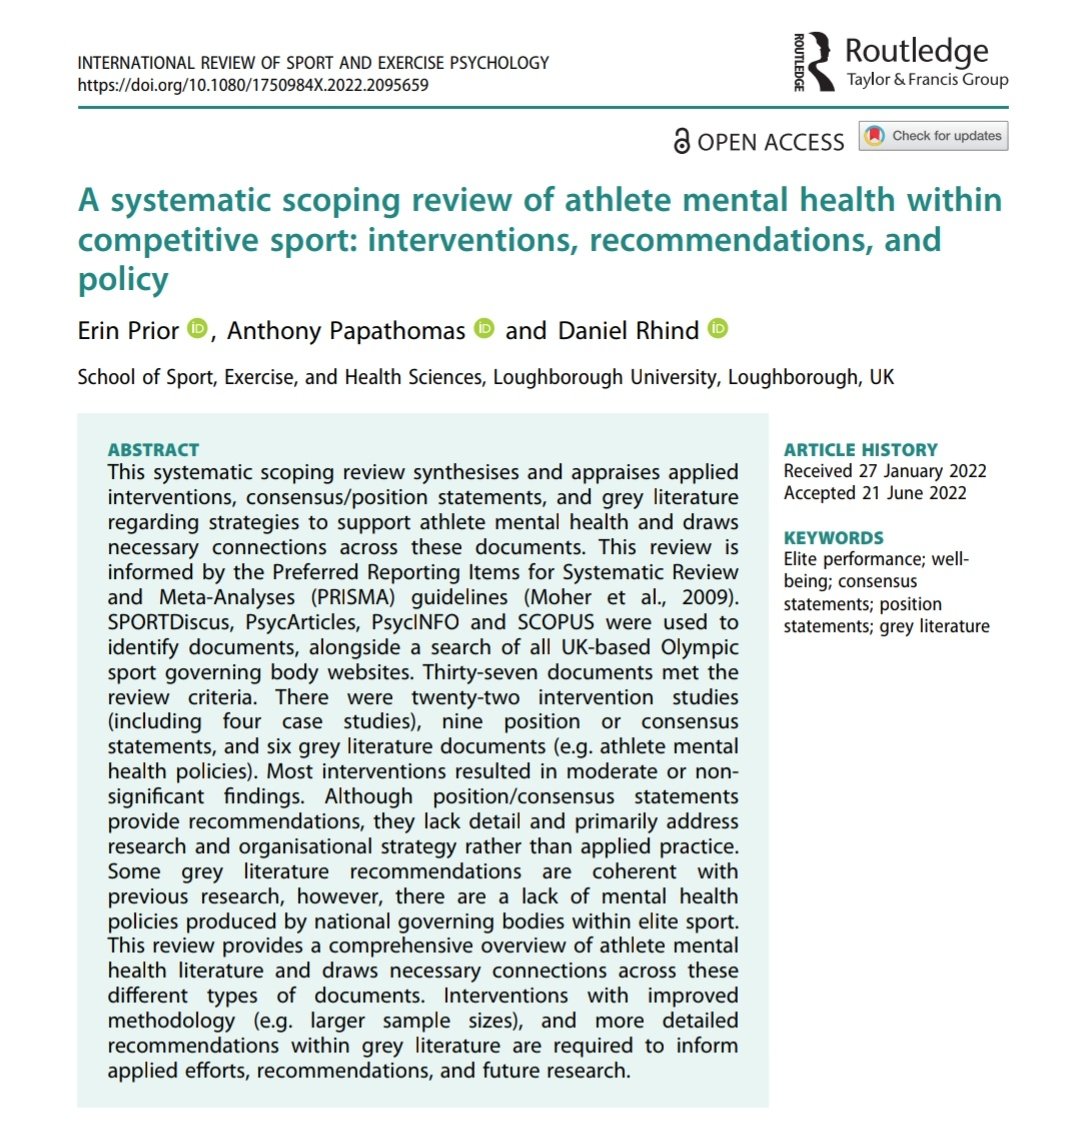 Excited to say my 1st PhD study has been published! @A_Papathomas @DrDanielRhind & I synthesise & review athlete mental health interventions, position/consensus statements & grey literature 😊🙌🙌🙌
#athletementalhealth #mentalhealth #sport #sportpsych 
tandfonline.com/doi/full/10.10…